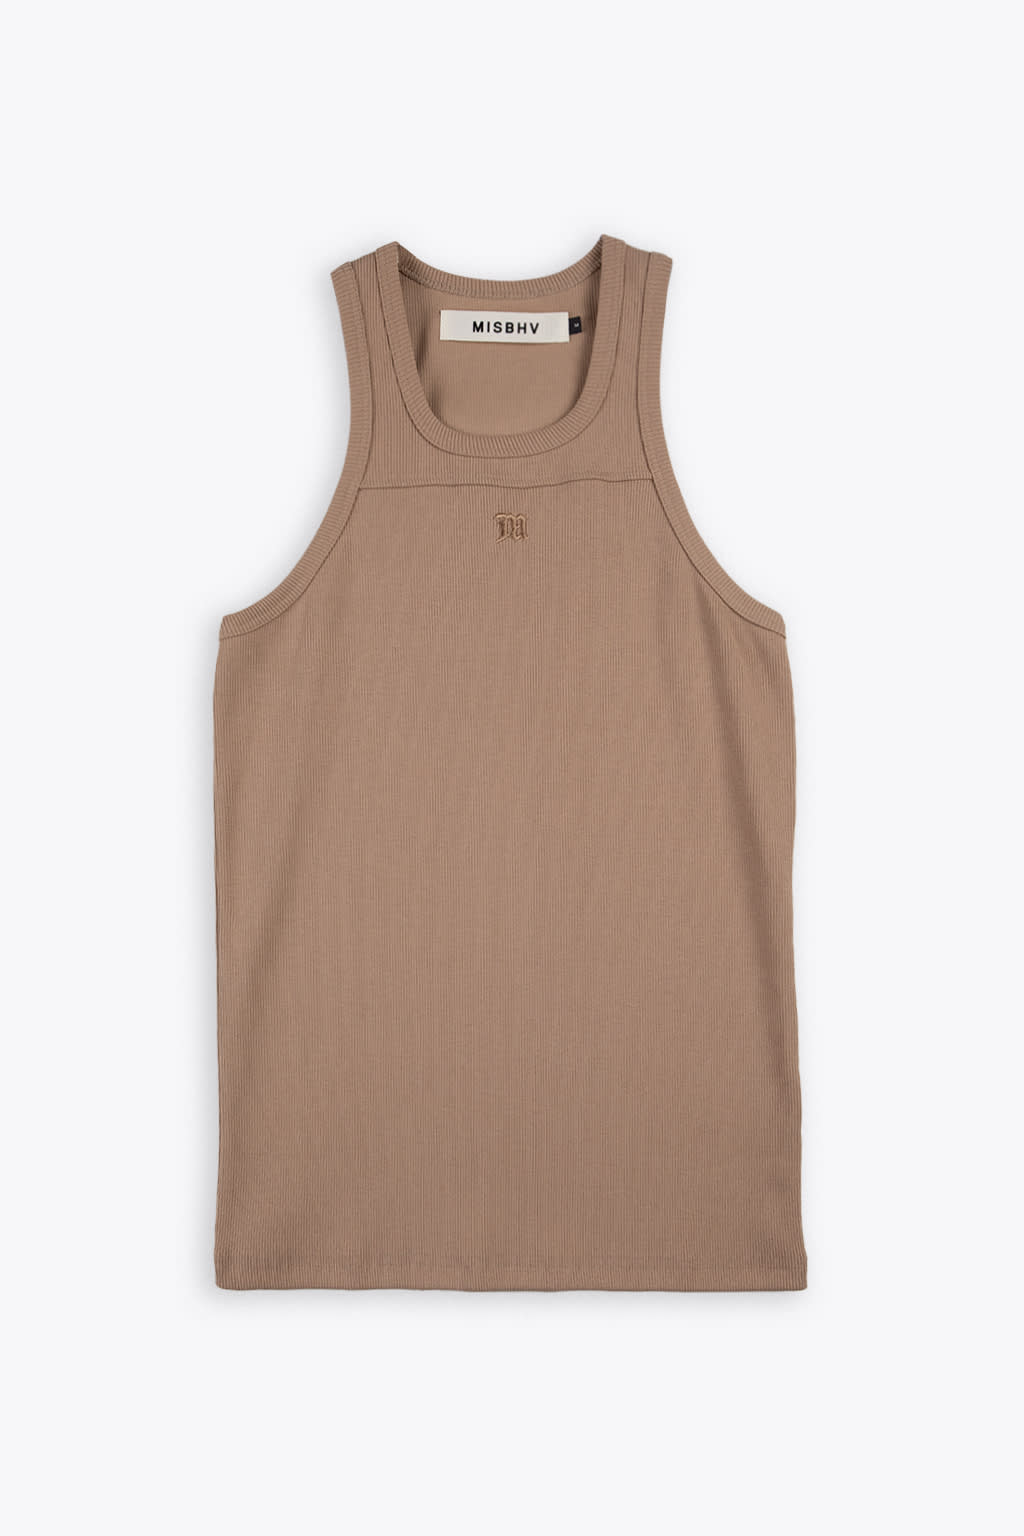 MISBHV THE M TANK TOP BEIGE RIBBED COTTON TANK TOP - M TANK TOP